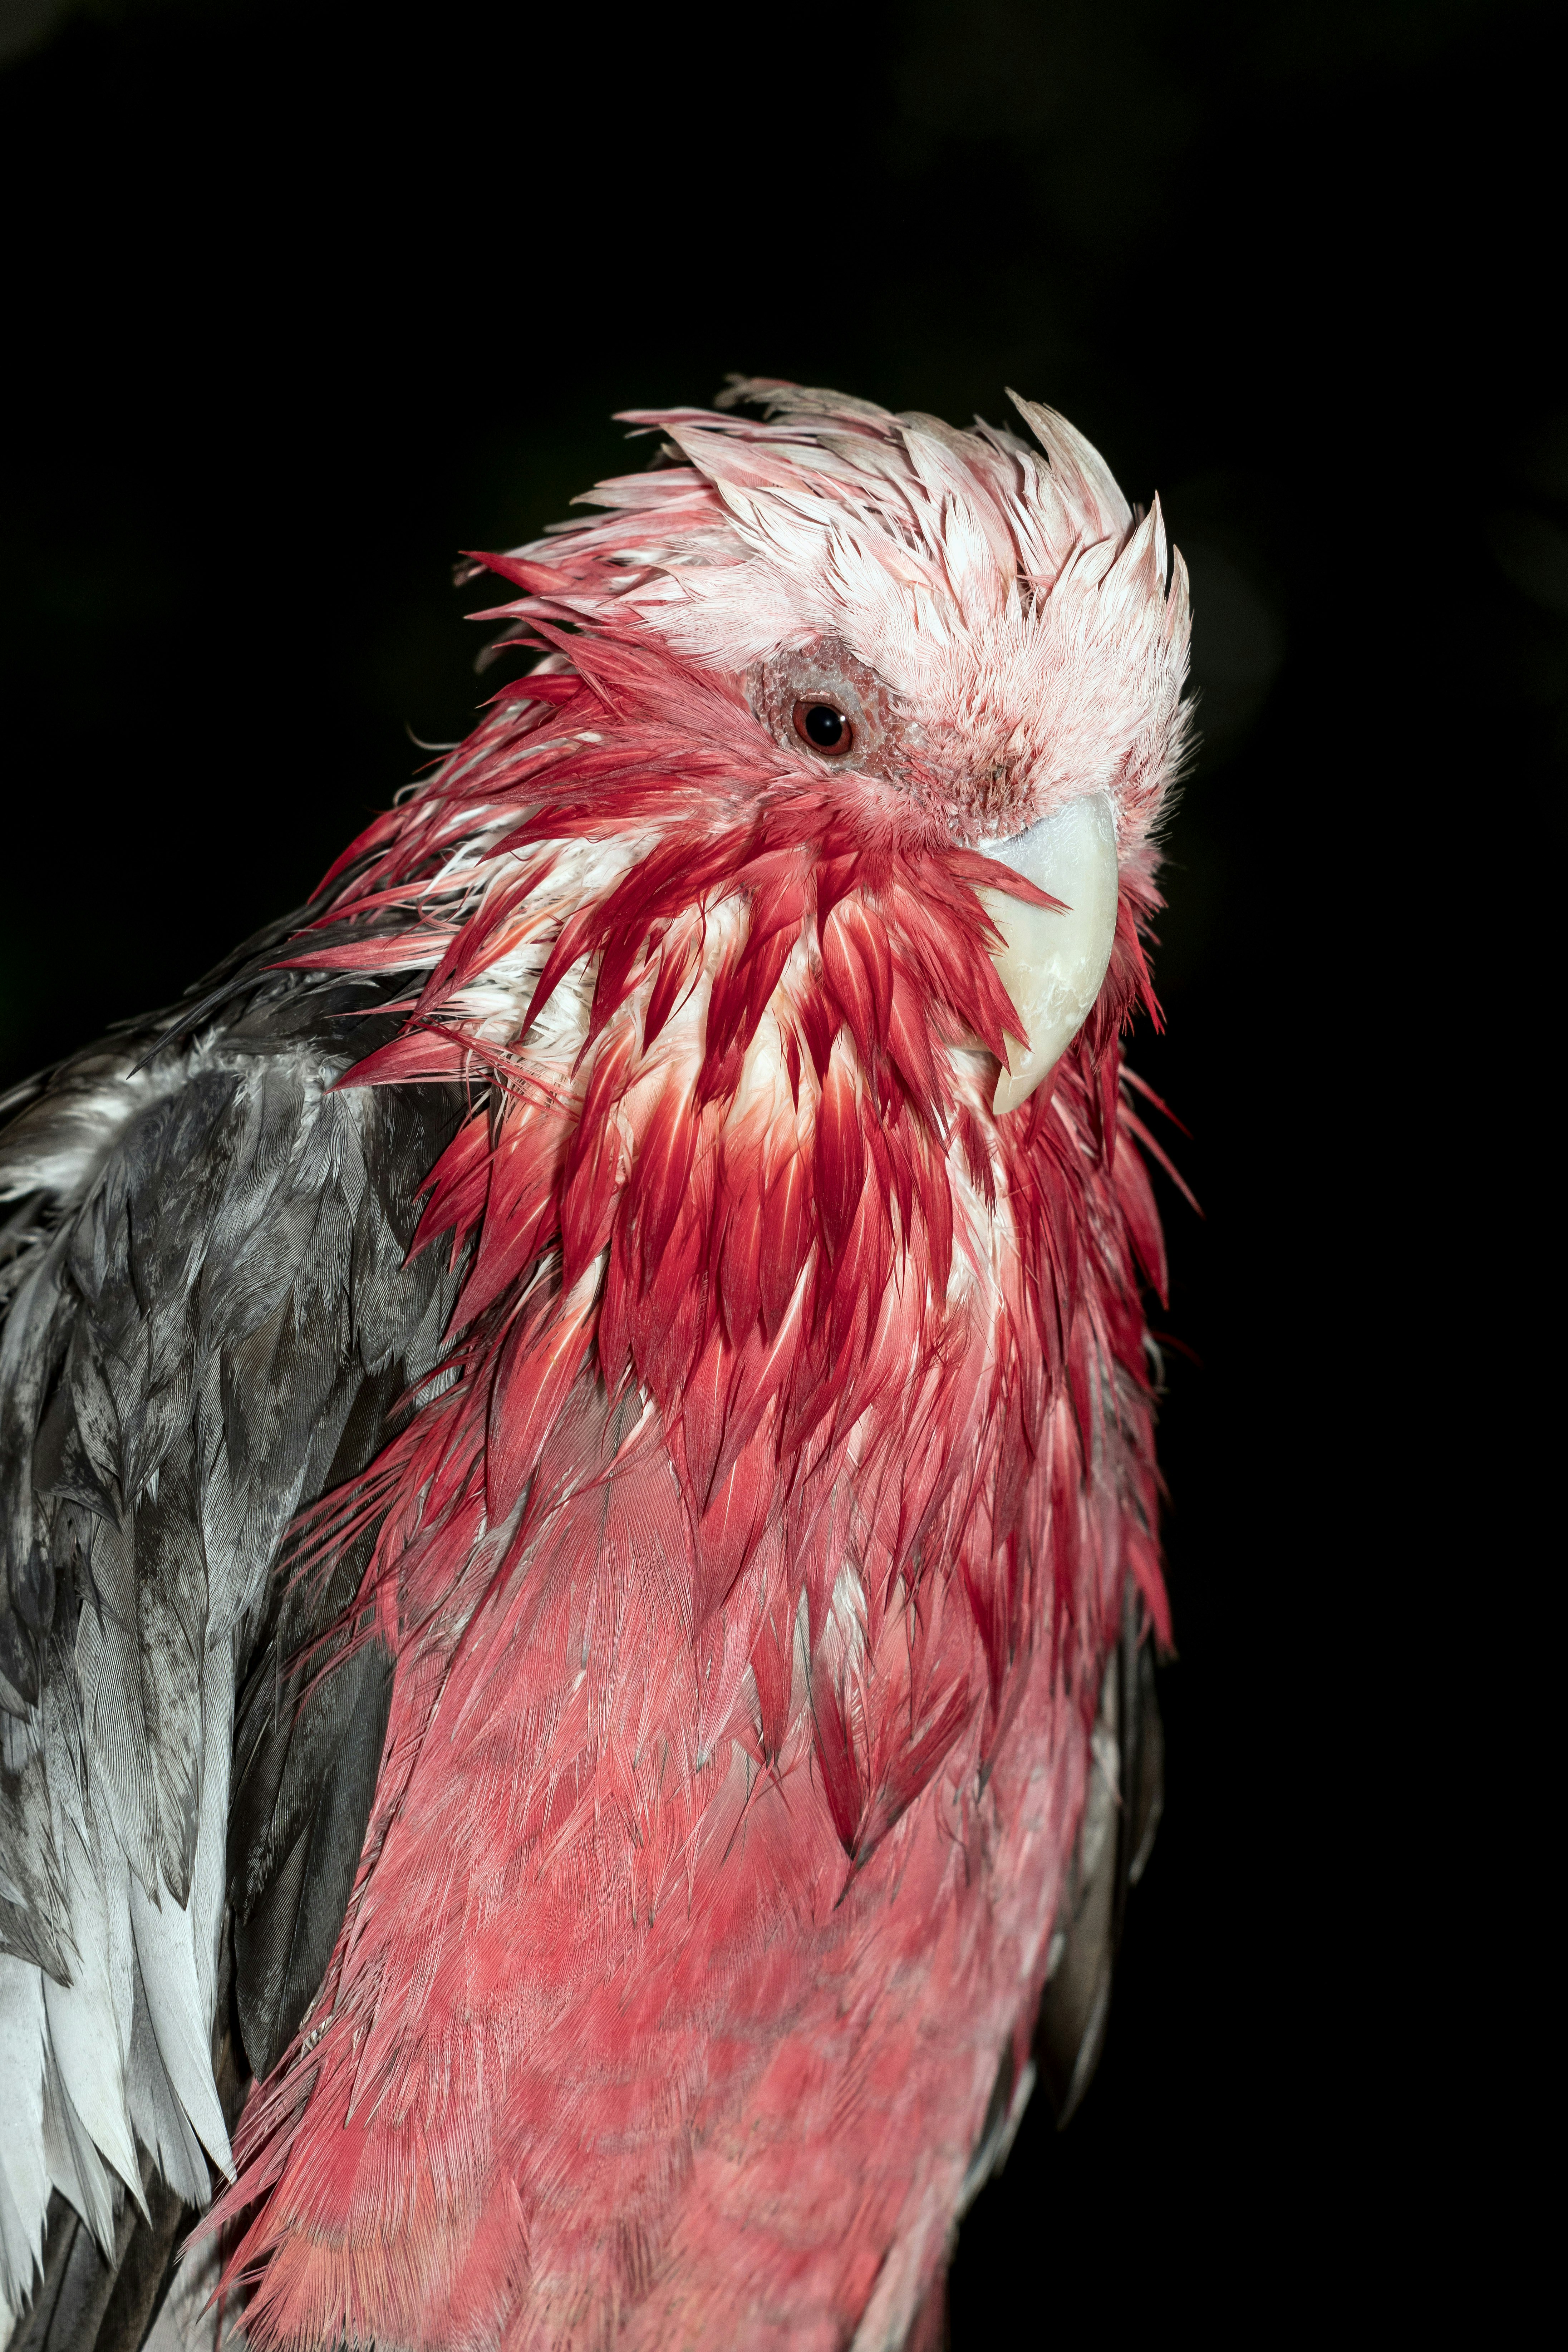 A rain-soaked galah. We have had a long stretch of hot weather with no rain, and perhaps this bird simply enjoyed getting wet and cooling down in the rain..